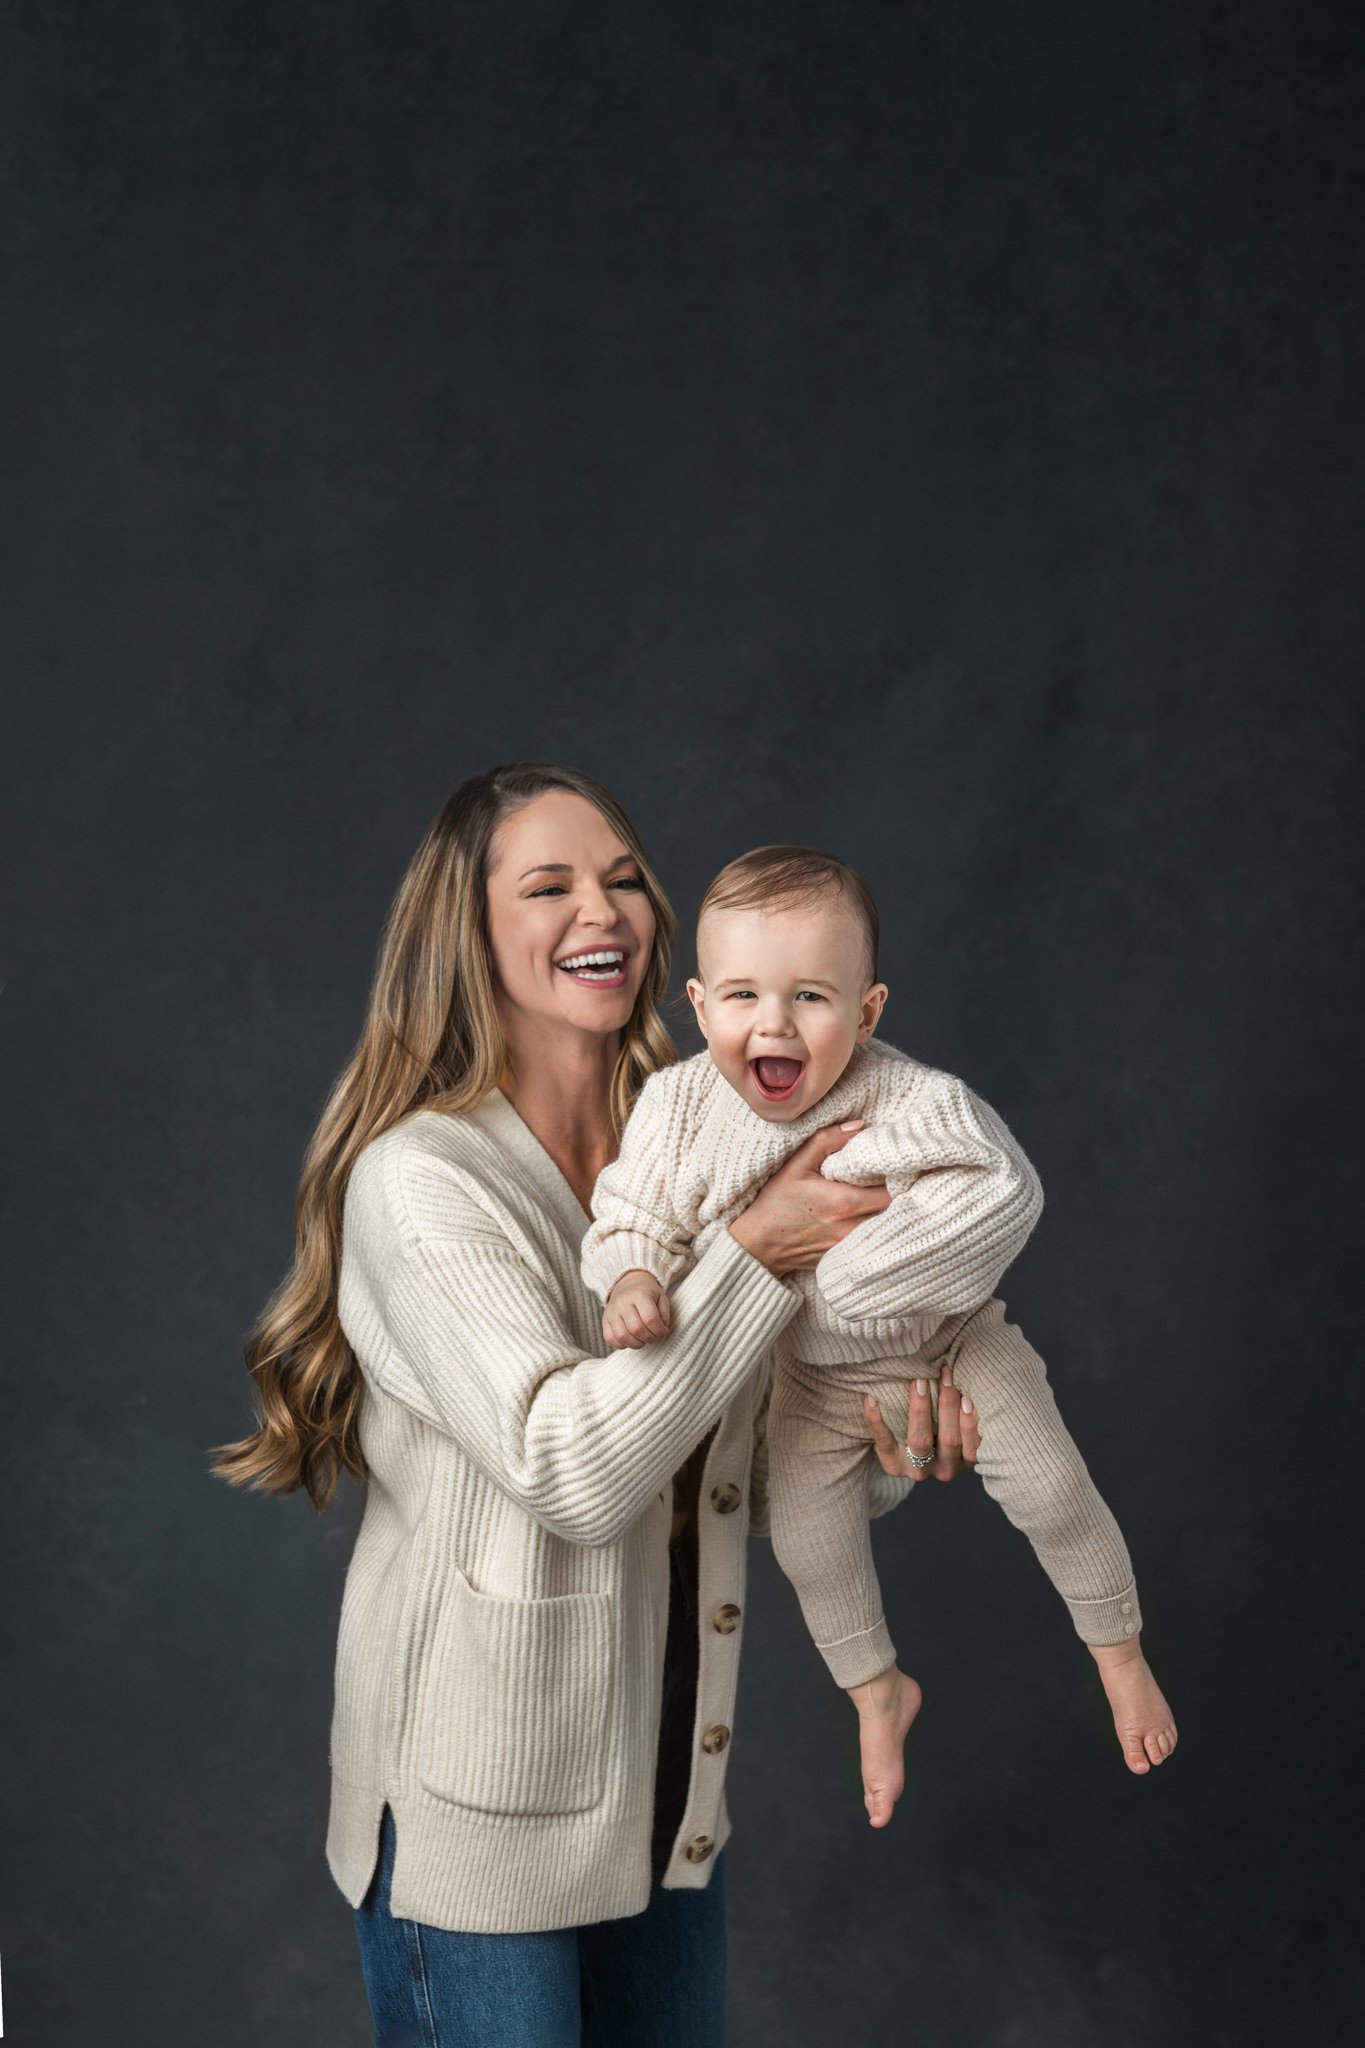  A mother zooms her baby boy around making them both laugh by Nicole Hawkins Photography. candid portrait of a mother and baby #NicoleHawkinsPhotography #NicoleHawkinsBabies #FirstBirthdayPhotography #StudioFamilyPortraits #NJBabies #FirstBirthday #S